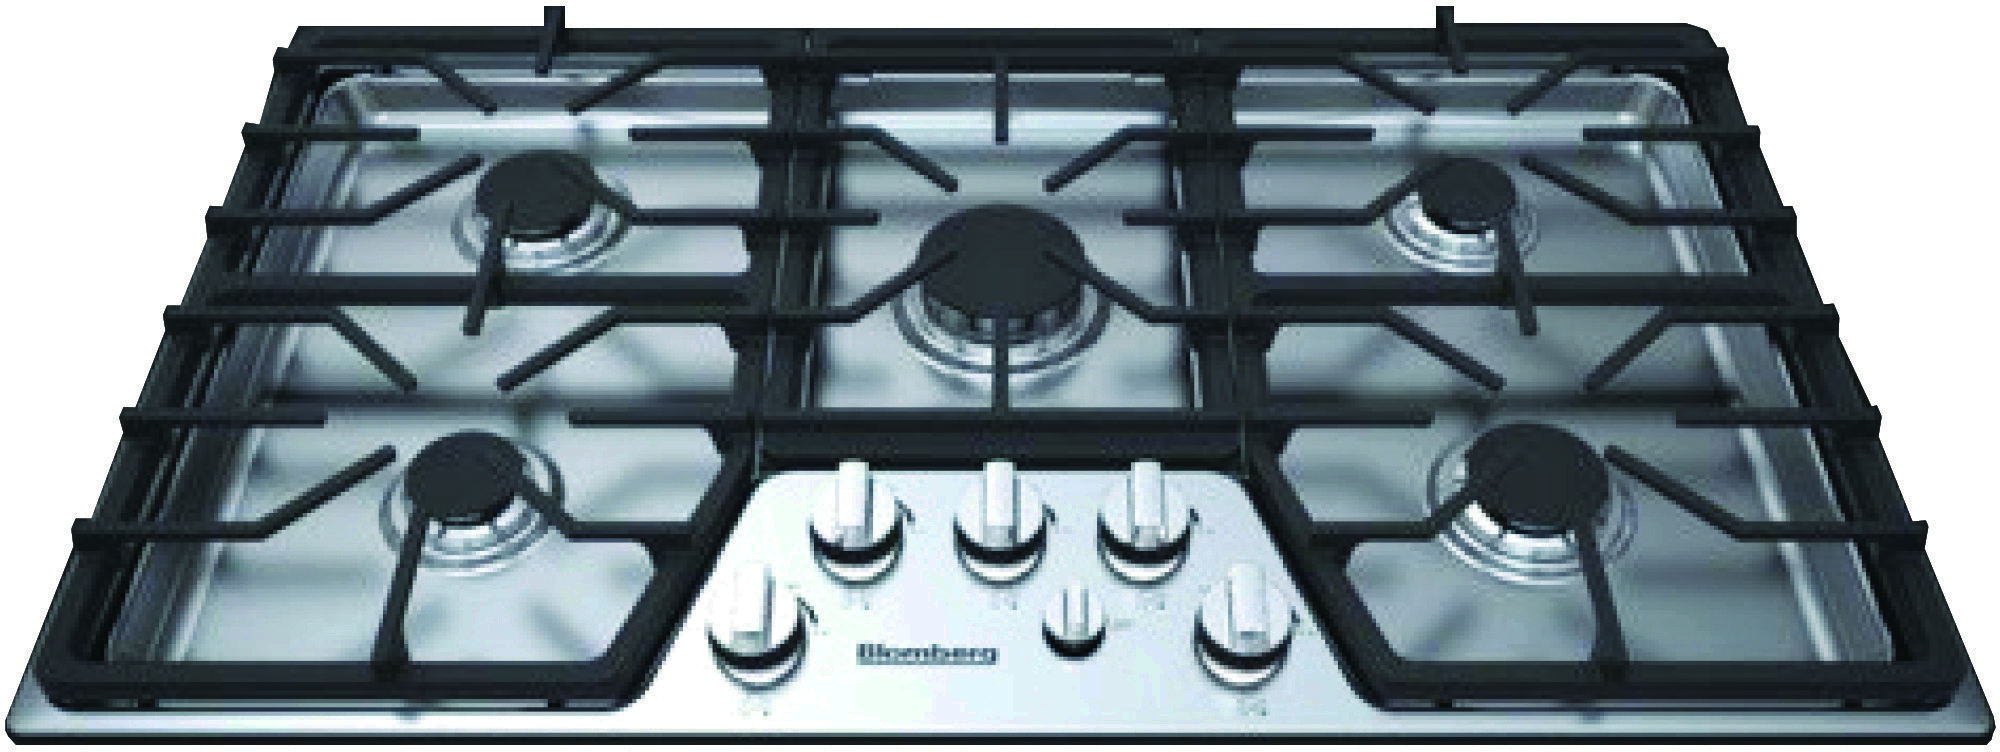 Blomberg 36 Natural Gas Drop-In Cooktop CTG36500SS